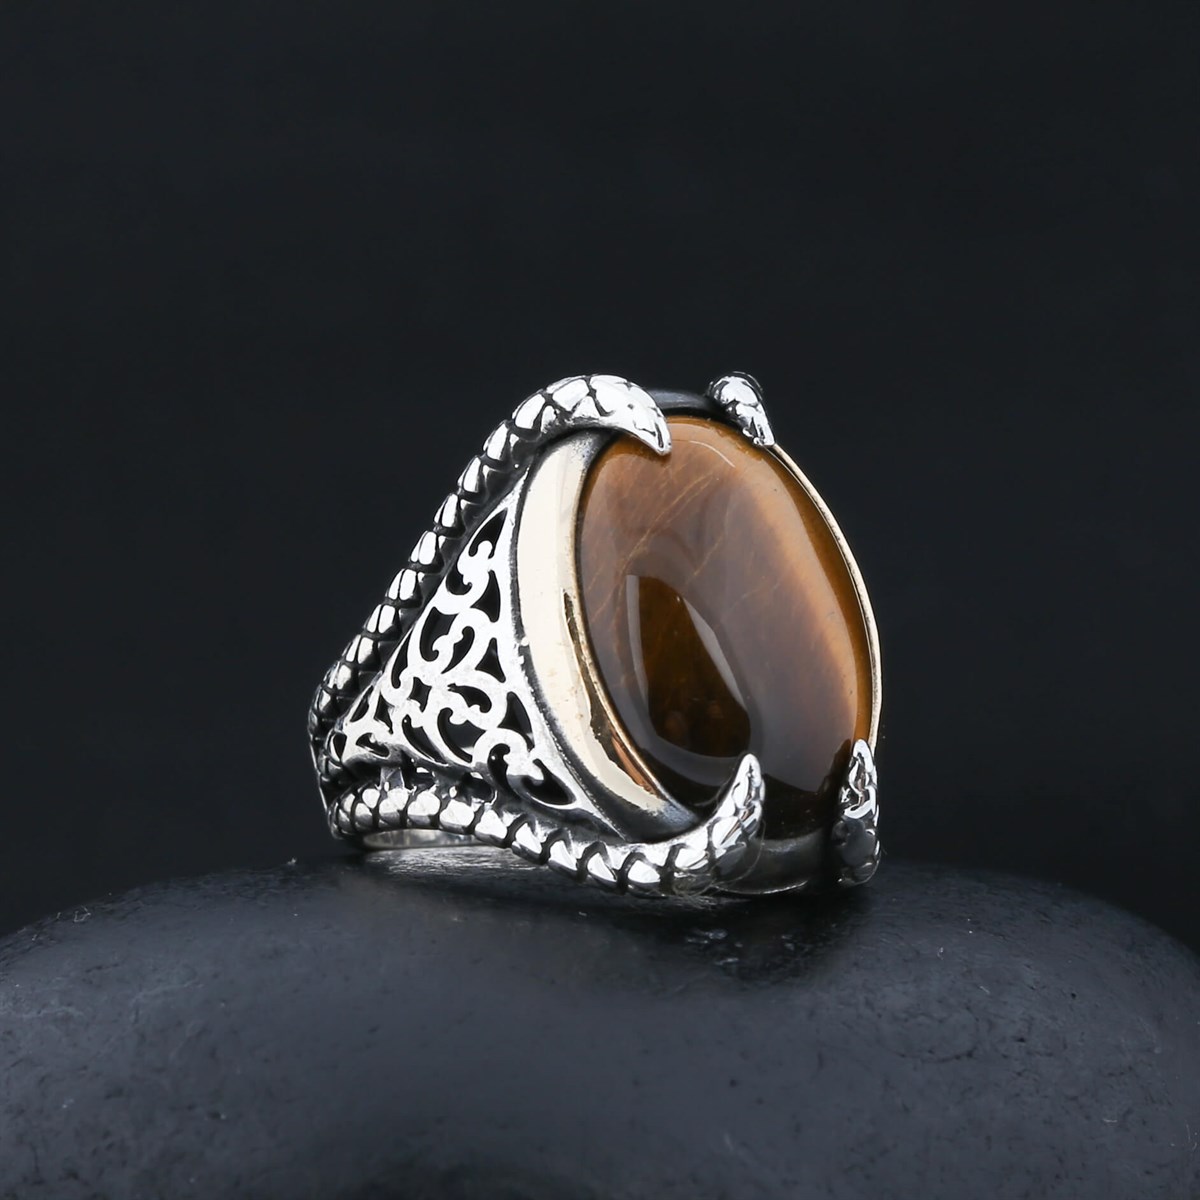 Tiger Eye Stone Clawed Silver Men's Ring